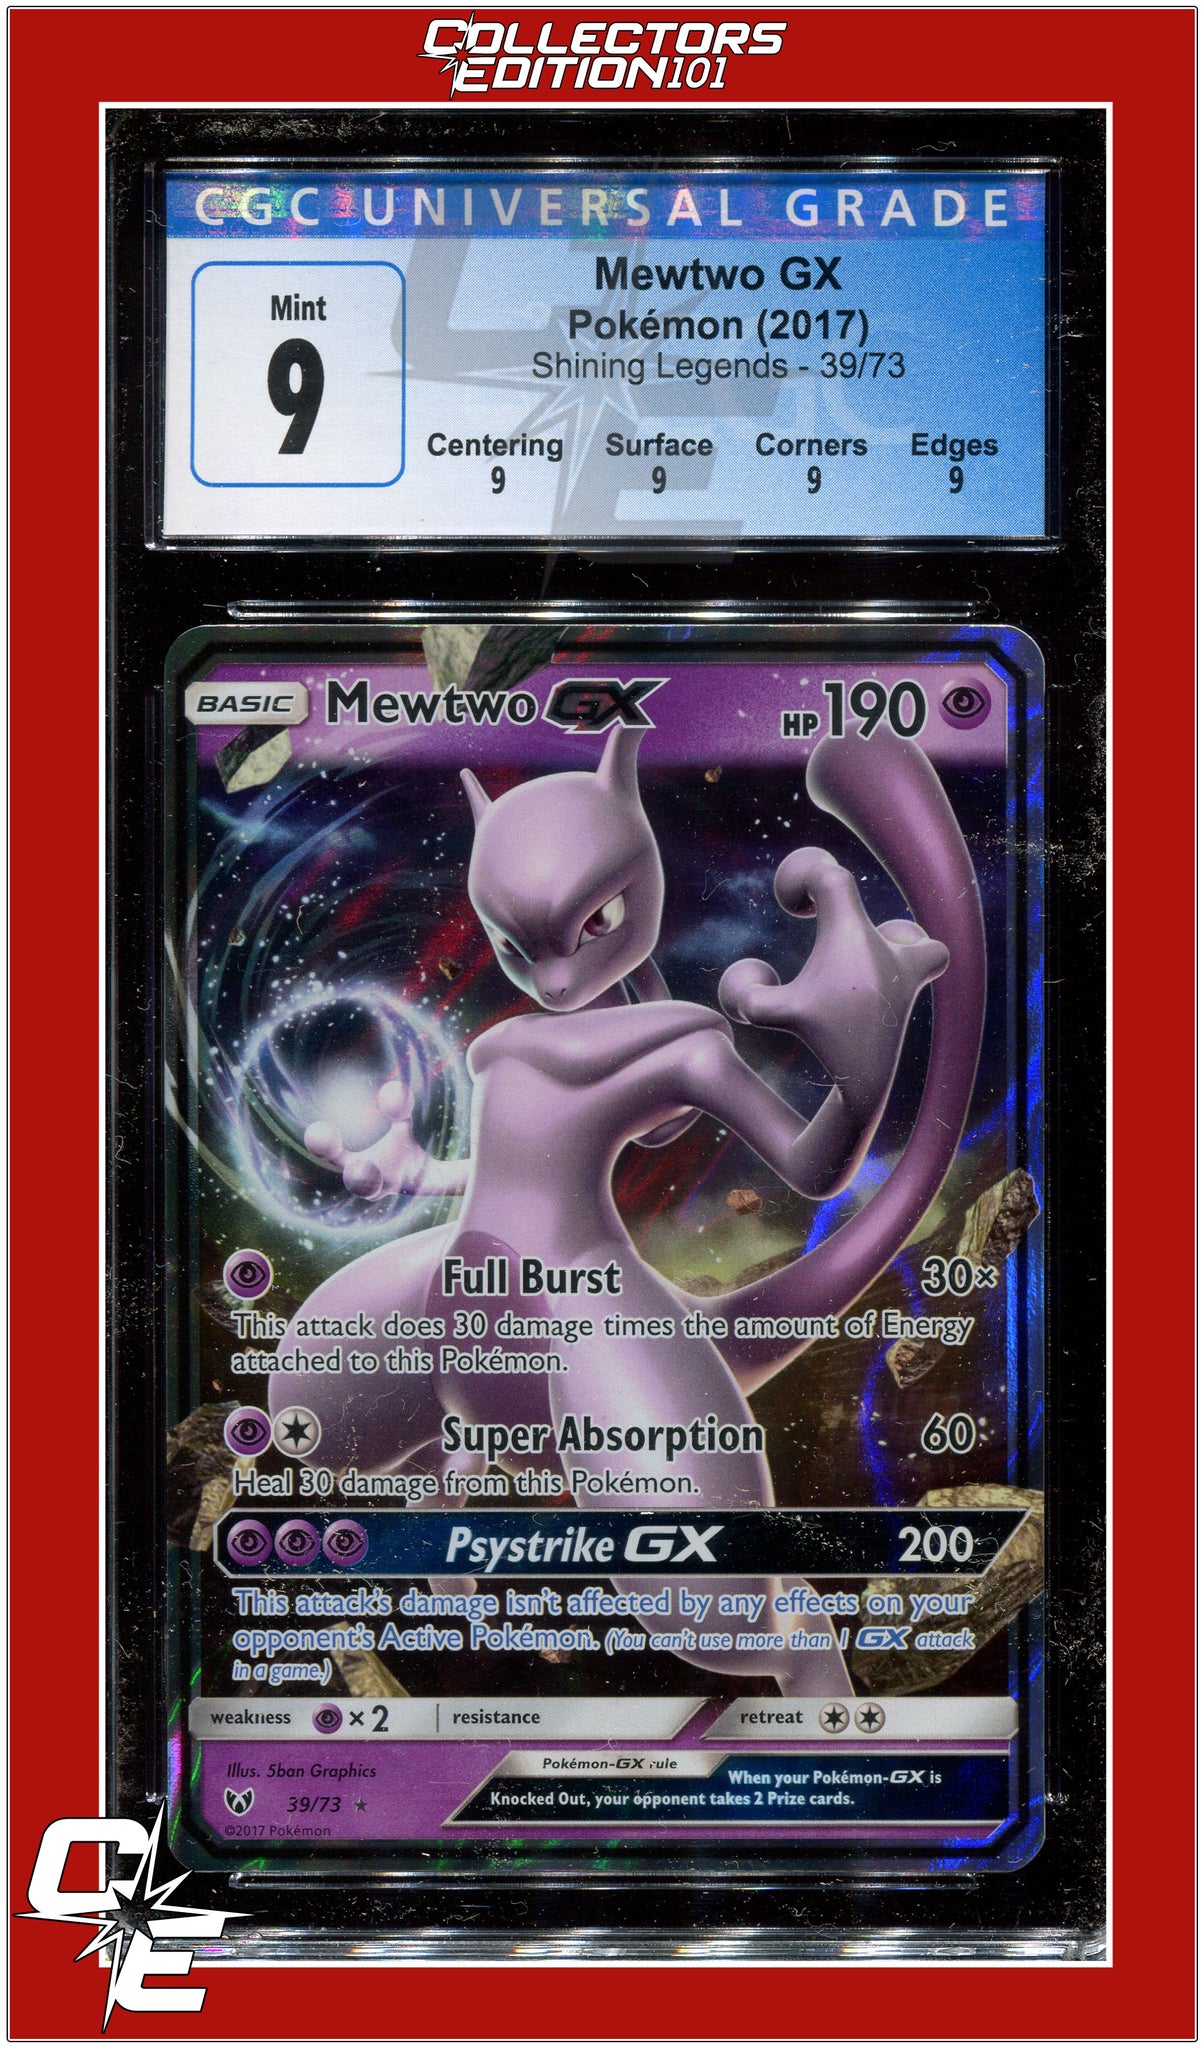 2017 Pokemon TCG Shining Legends Pin Collection Mewtwo - US